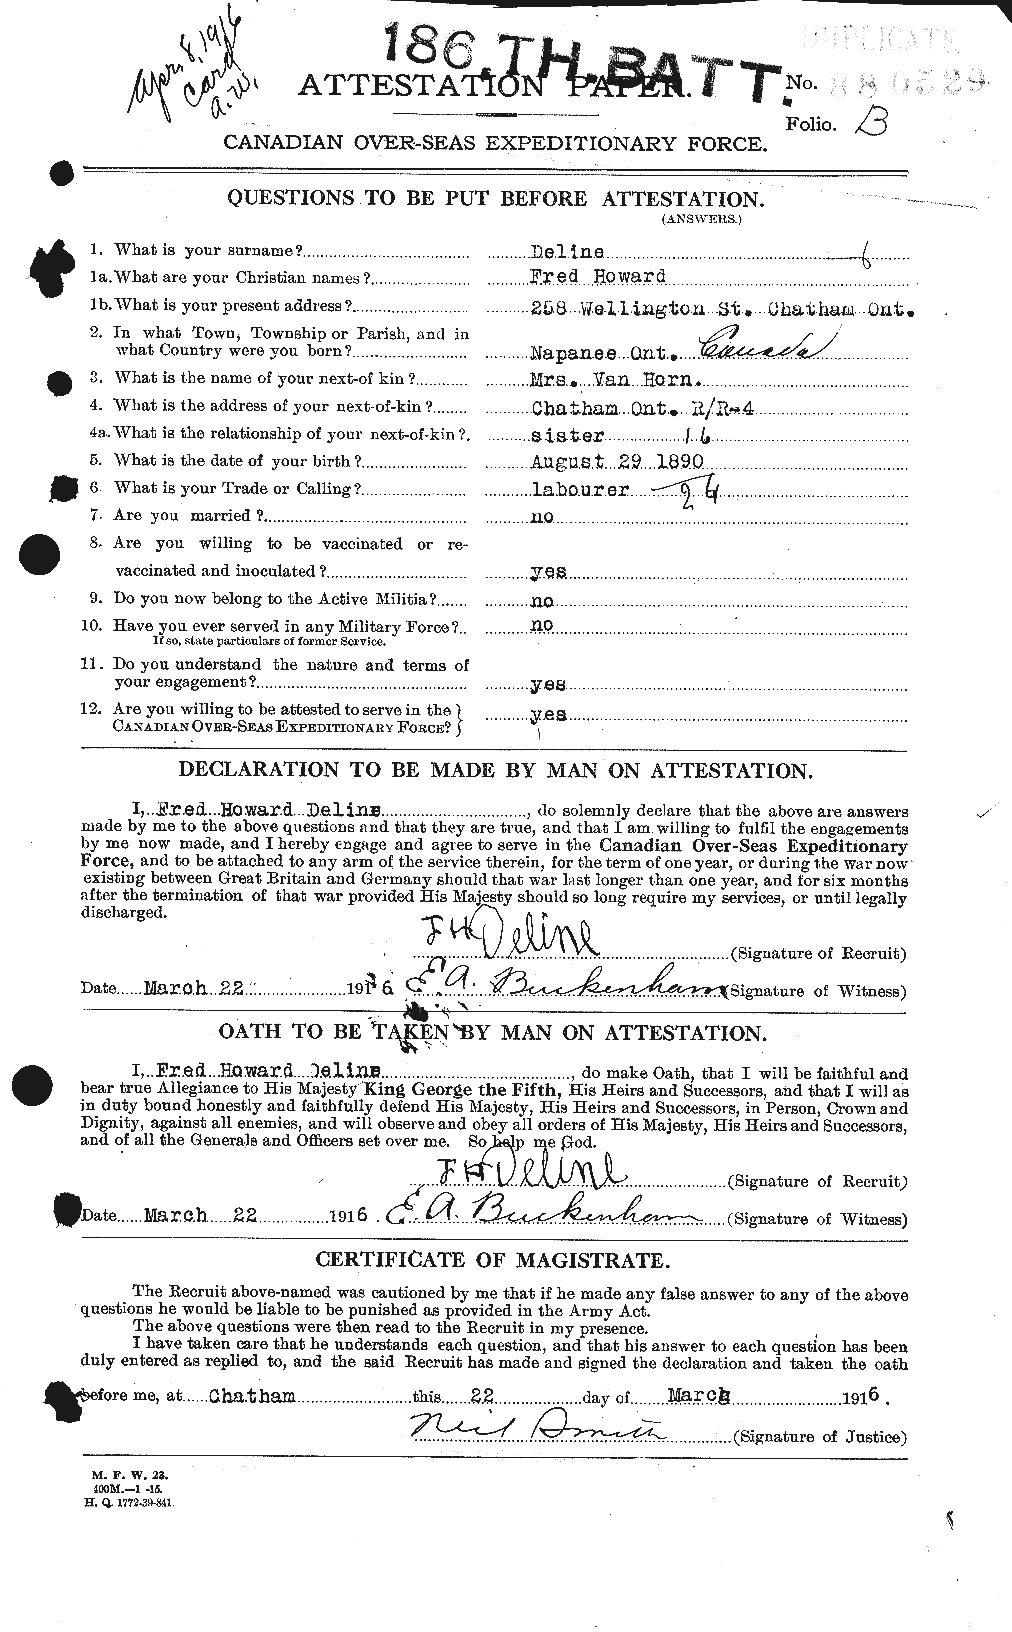 Personnel Records of the First World War - CEF 286563a